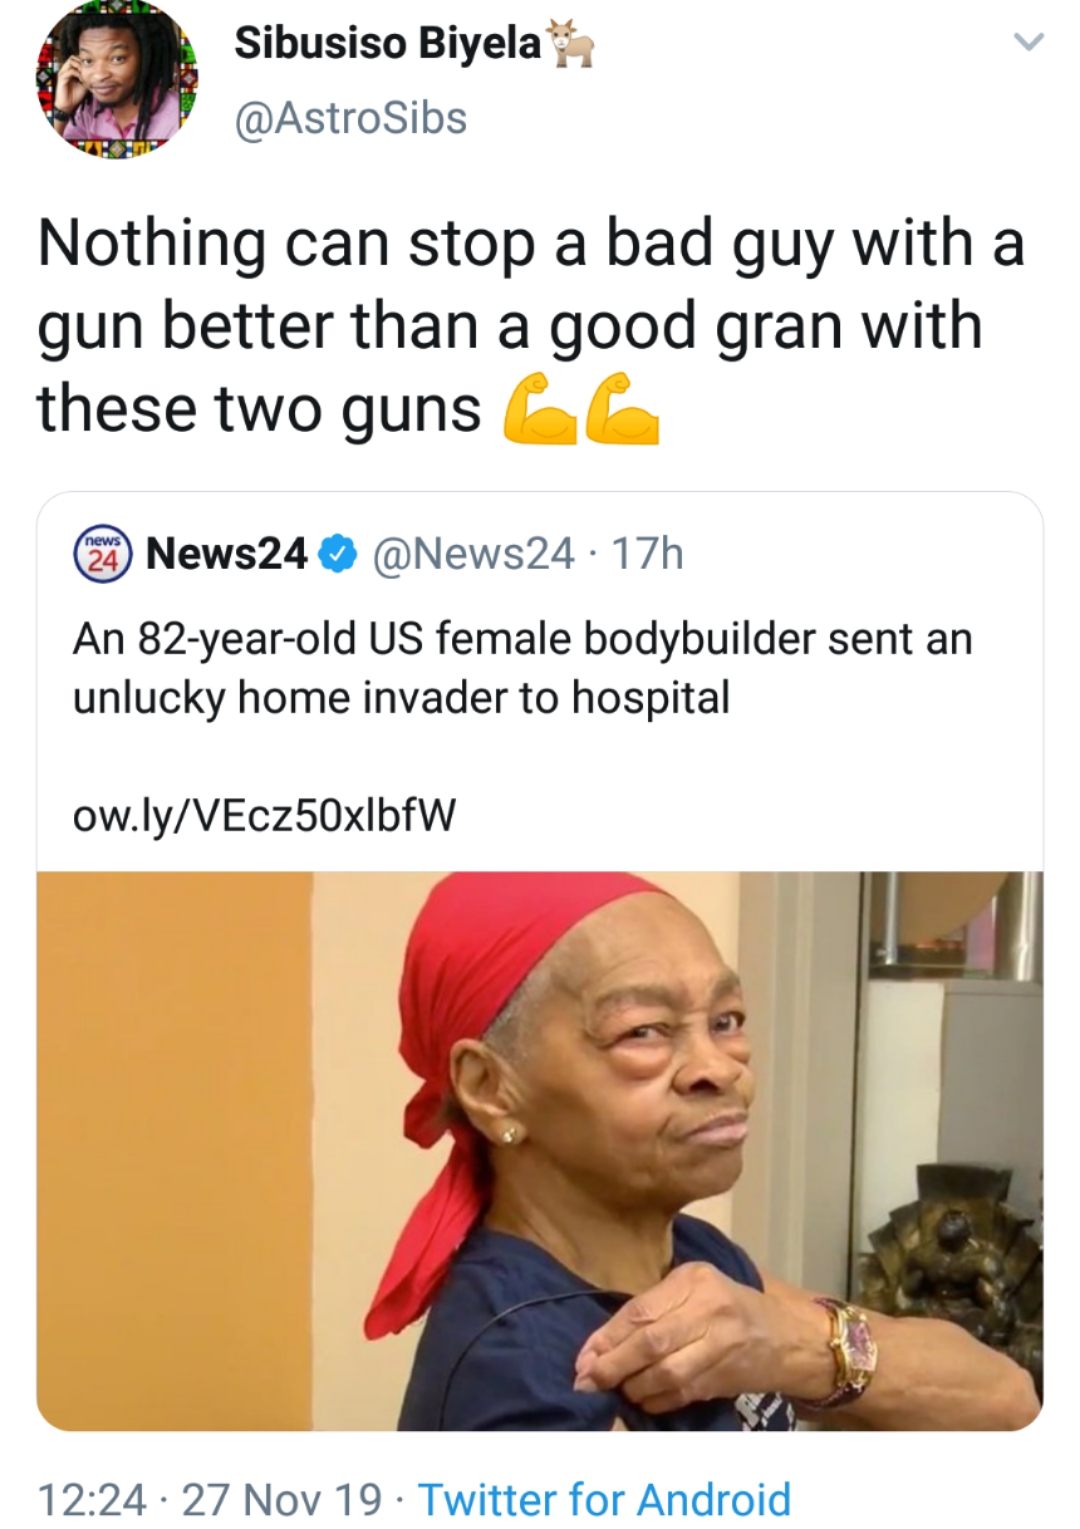 human behavior - Sibusiso Biyela Nothing can stop a bad guy with a gun better than a good gran with these two gunsG News24 17h An 82yearold Us female bodybuilder sent an unlucky home invader to hospital ow.lyVEcz50xlbfw . 27 Nov 19. Twitter for Android